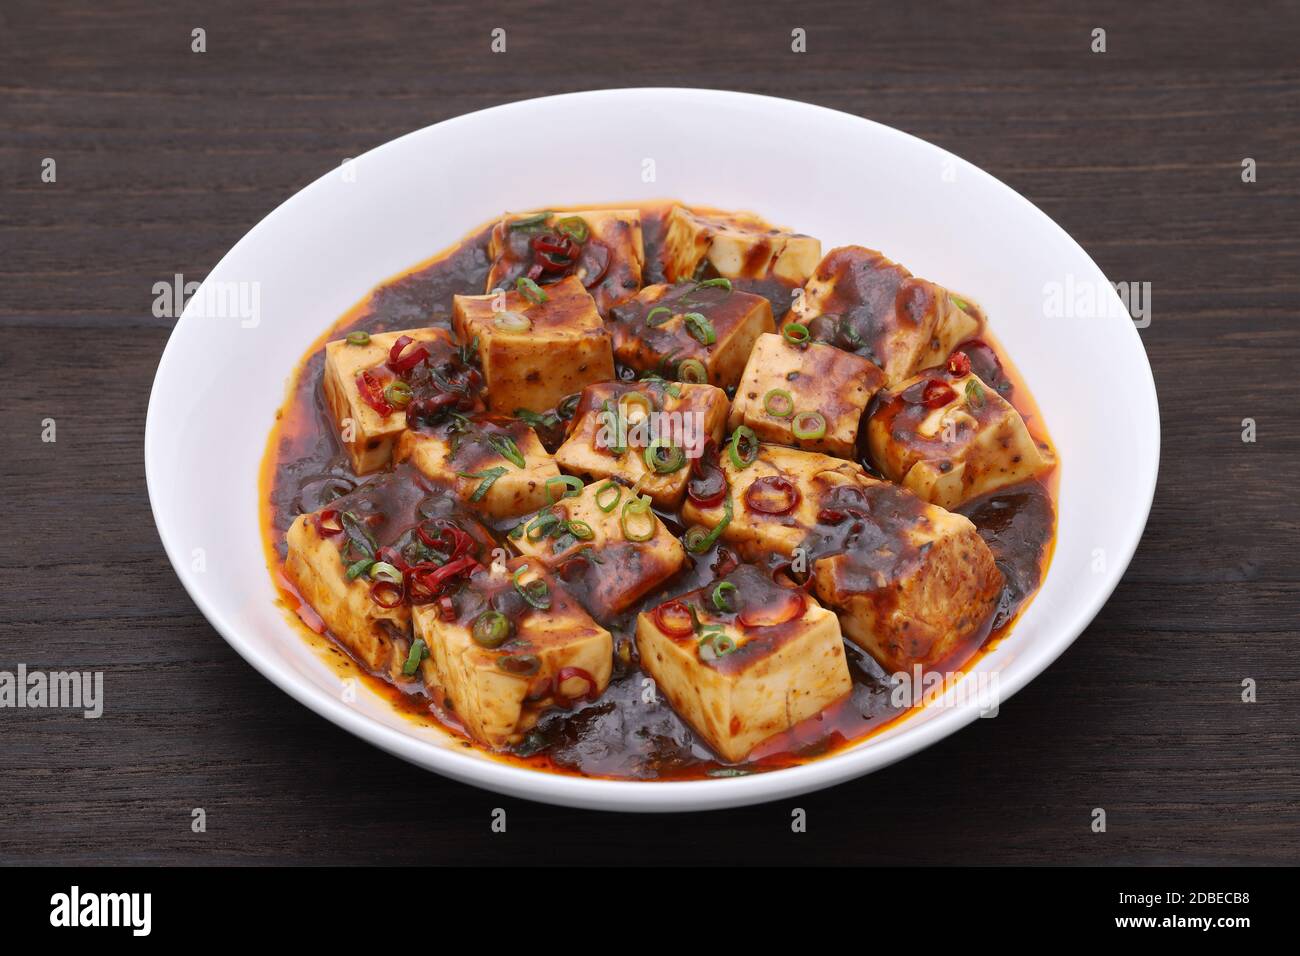 Chinese cuisine mabo tofu in a dish on wooden table Stock Photo